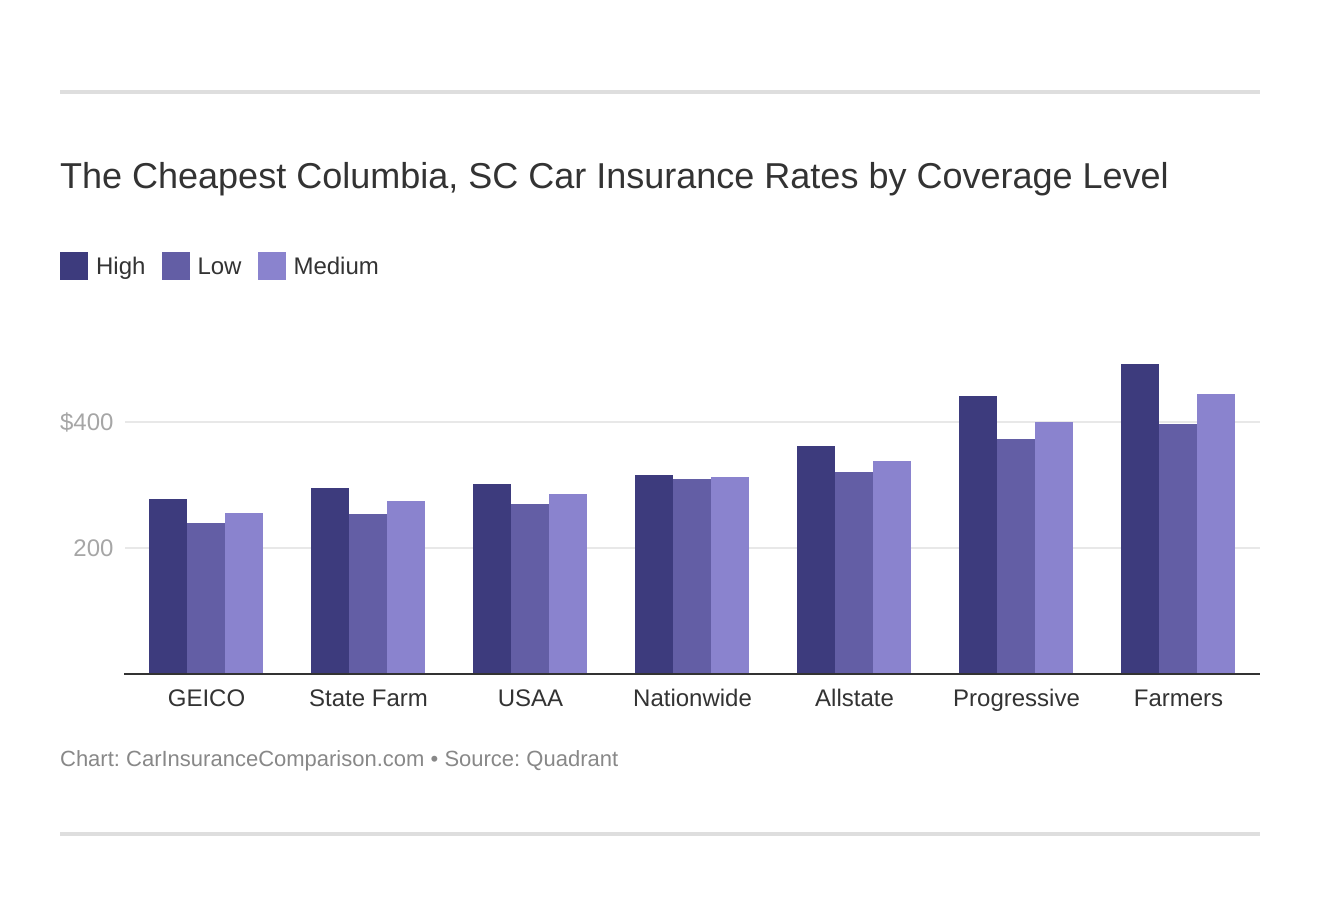 The Cheapest Columbia, SC Car Insurance Rates by Coverage Level